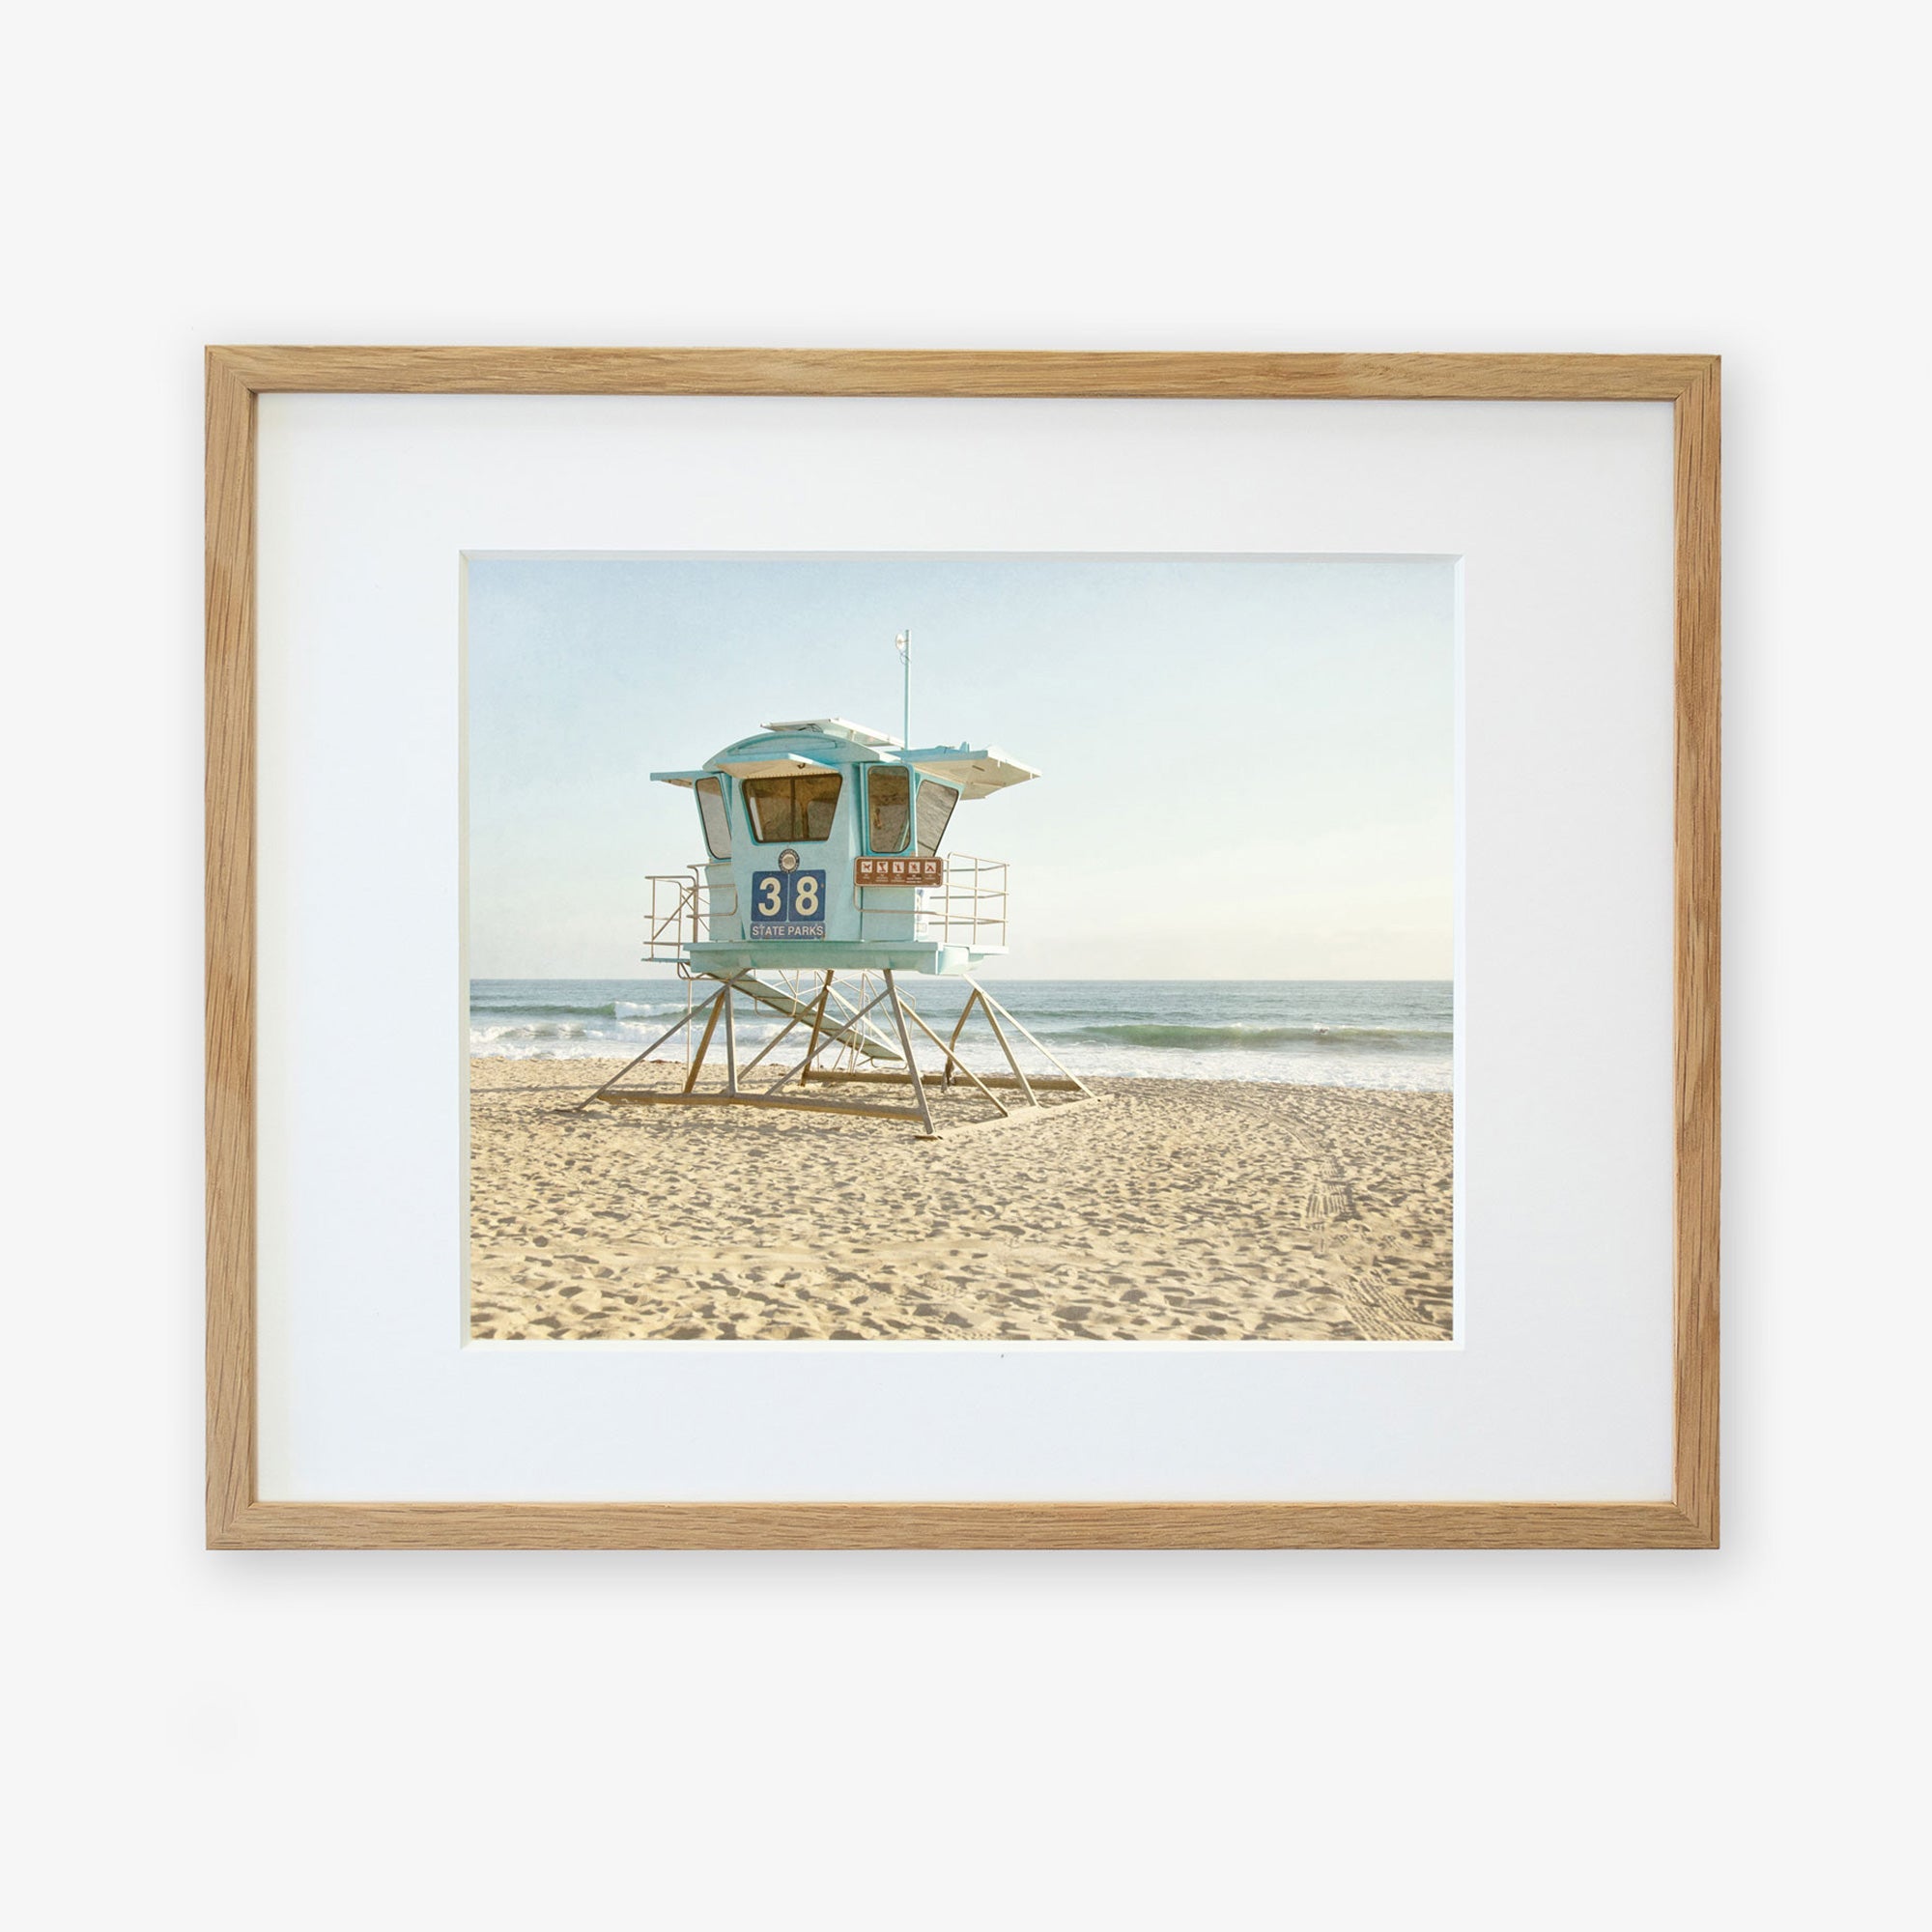 A framed photo of a lifeguard tower marked &quot;38&quot; standing on a sandy beach, printed on archival photographic paper, with serene ocean waves in the background under a clear sky - Offley Green&#39;s California Coastal Print, &#39;Carlsbad Lifeguard Tower&#39;